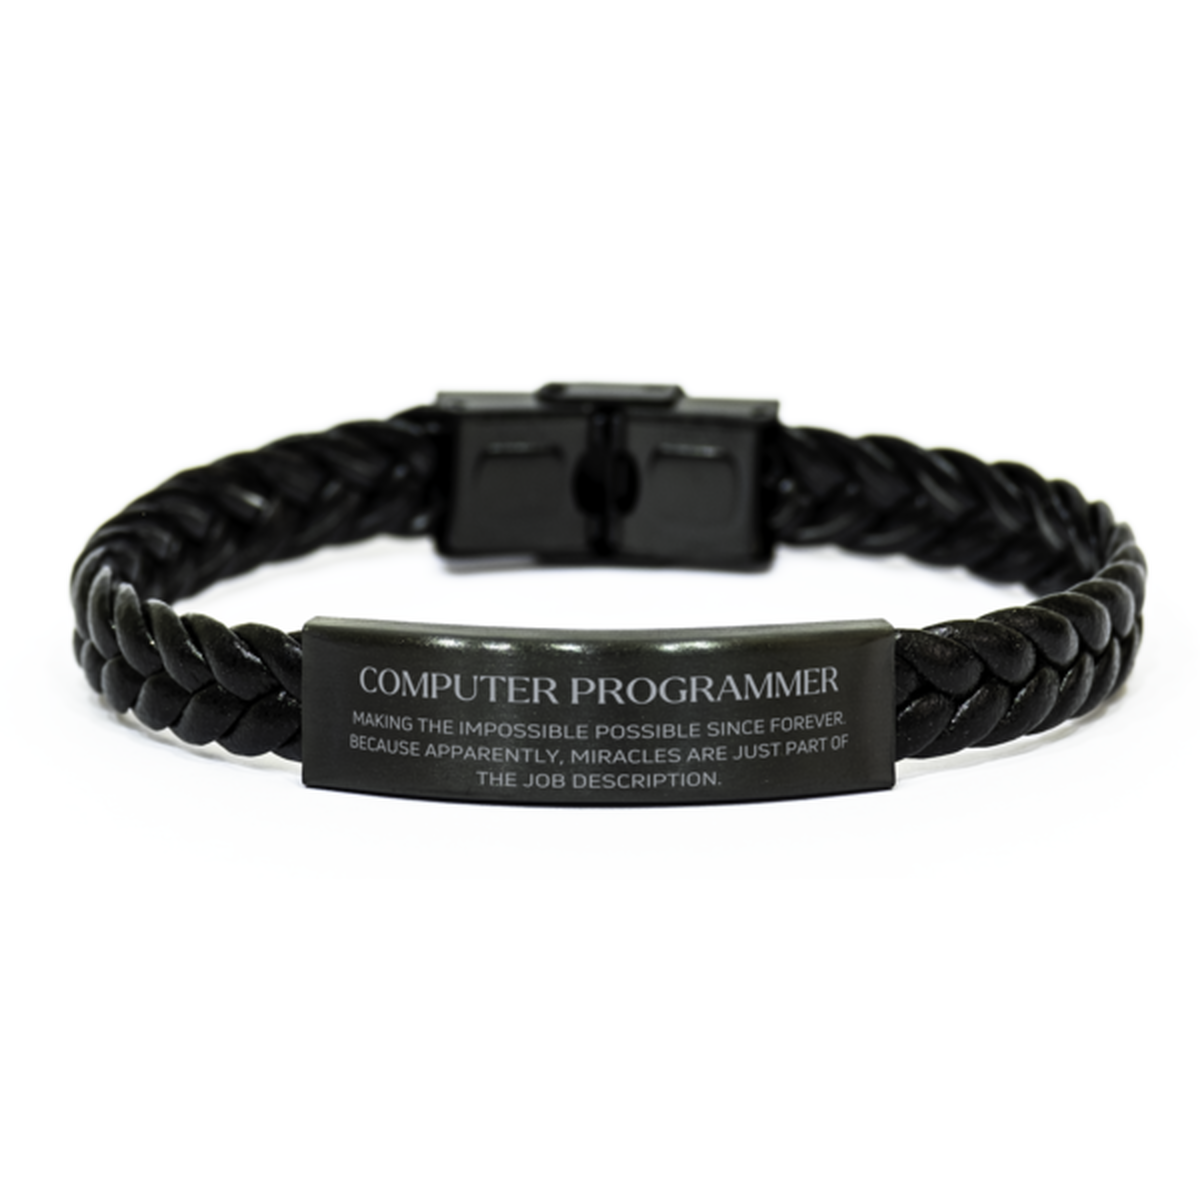 Funny Computer Programmer Gifts, Miracles are just part of the job description, Inspirational Birthday Braided Leather Bracelet For Computer Programmer, Men, Women, Coworkers, Friends, Boss